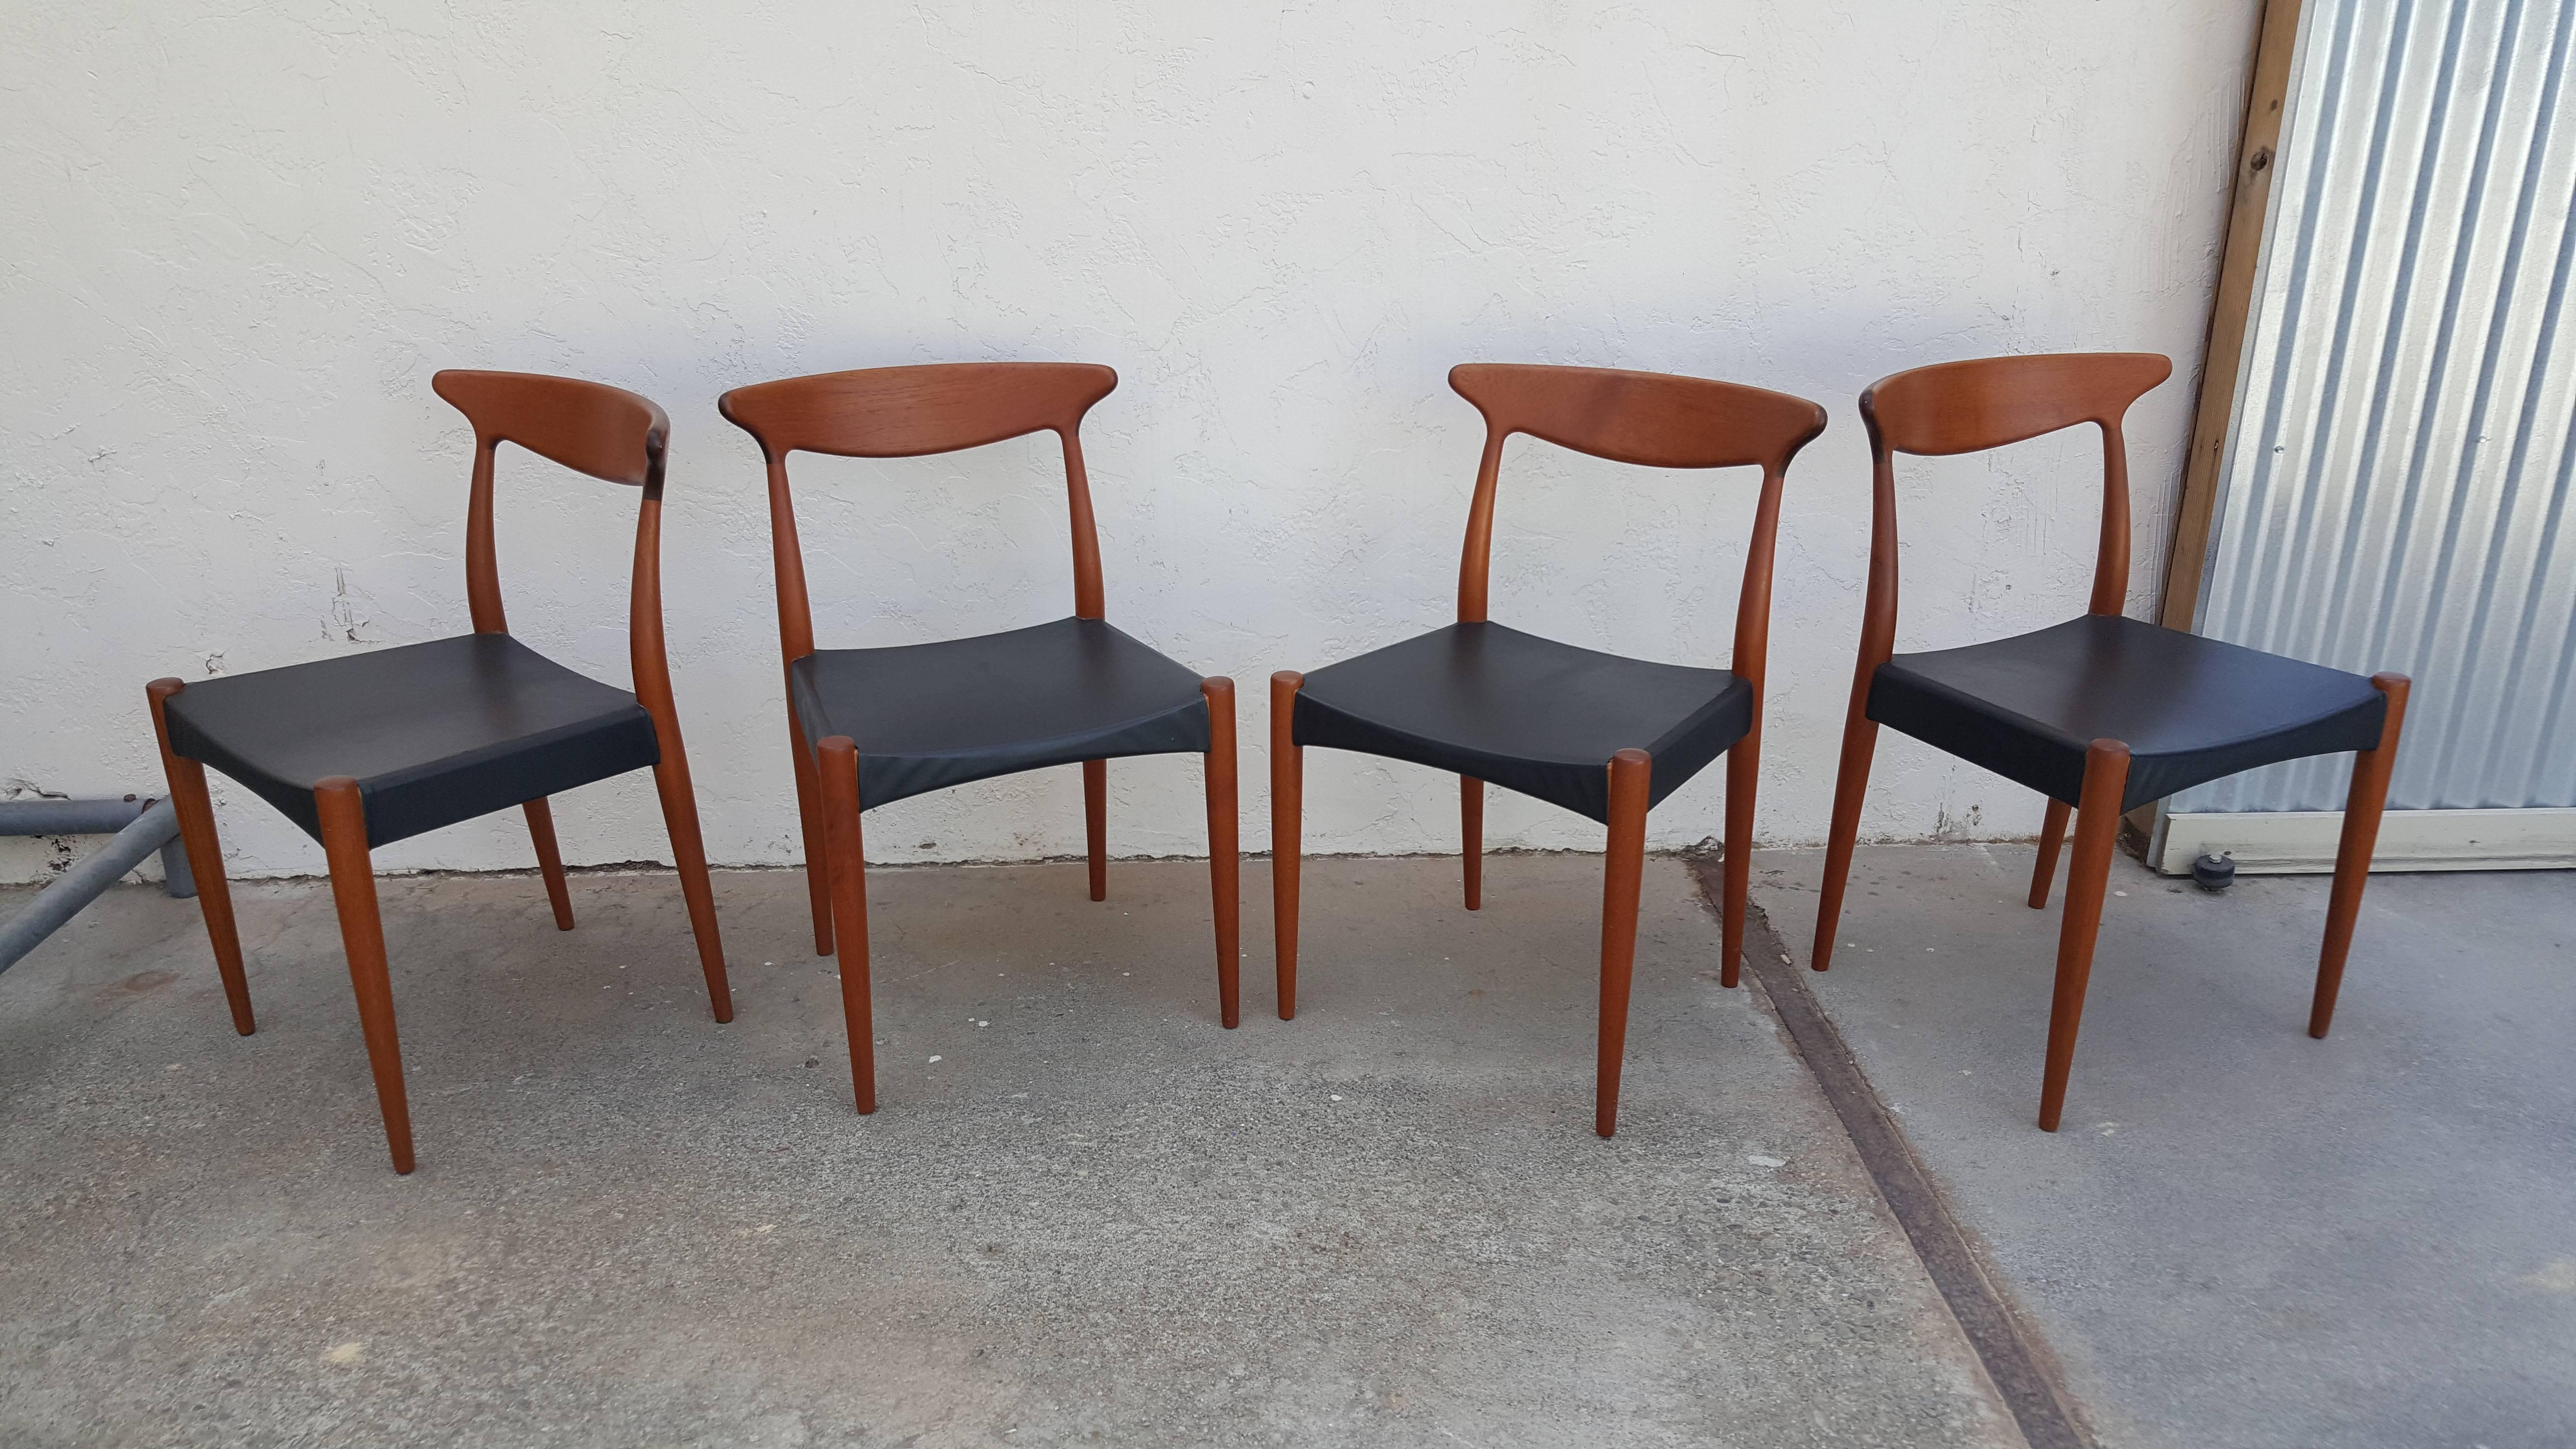 Classic Scandinavian design in this set of four teak dining chairs designed by Arne Hovmand Olsen for Mogens Kold. Excellent original finish, sturdy construction.